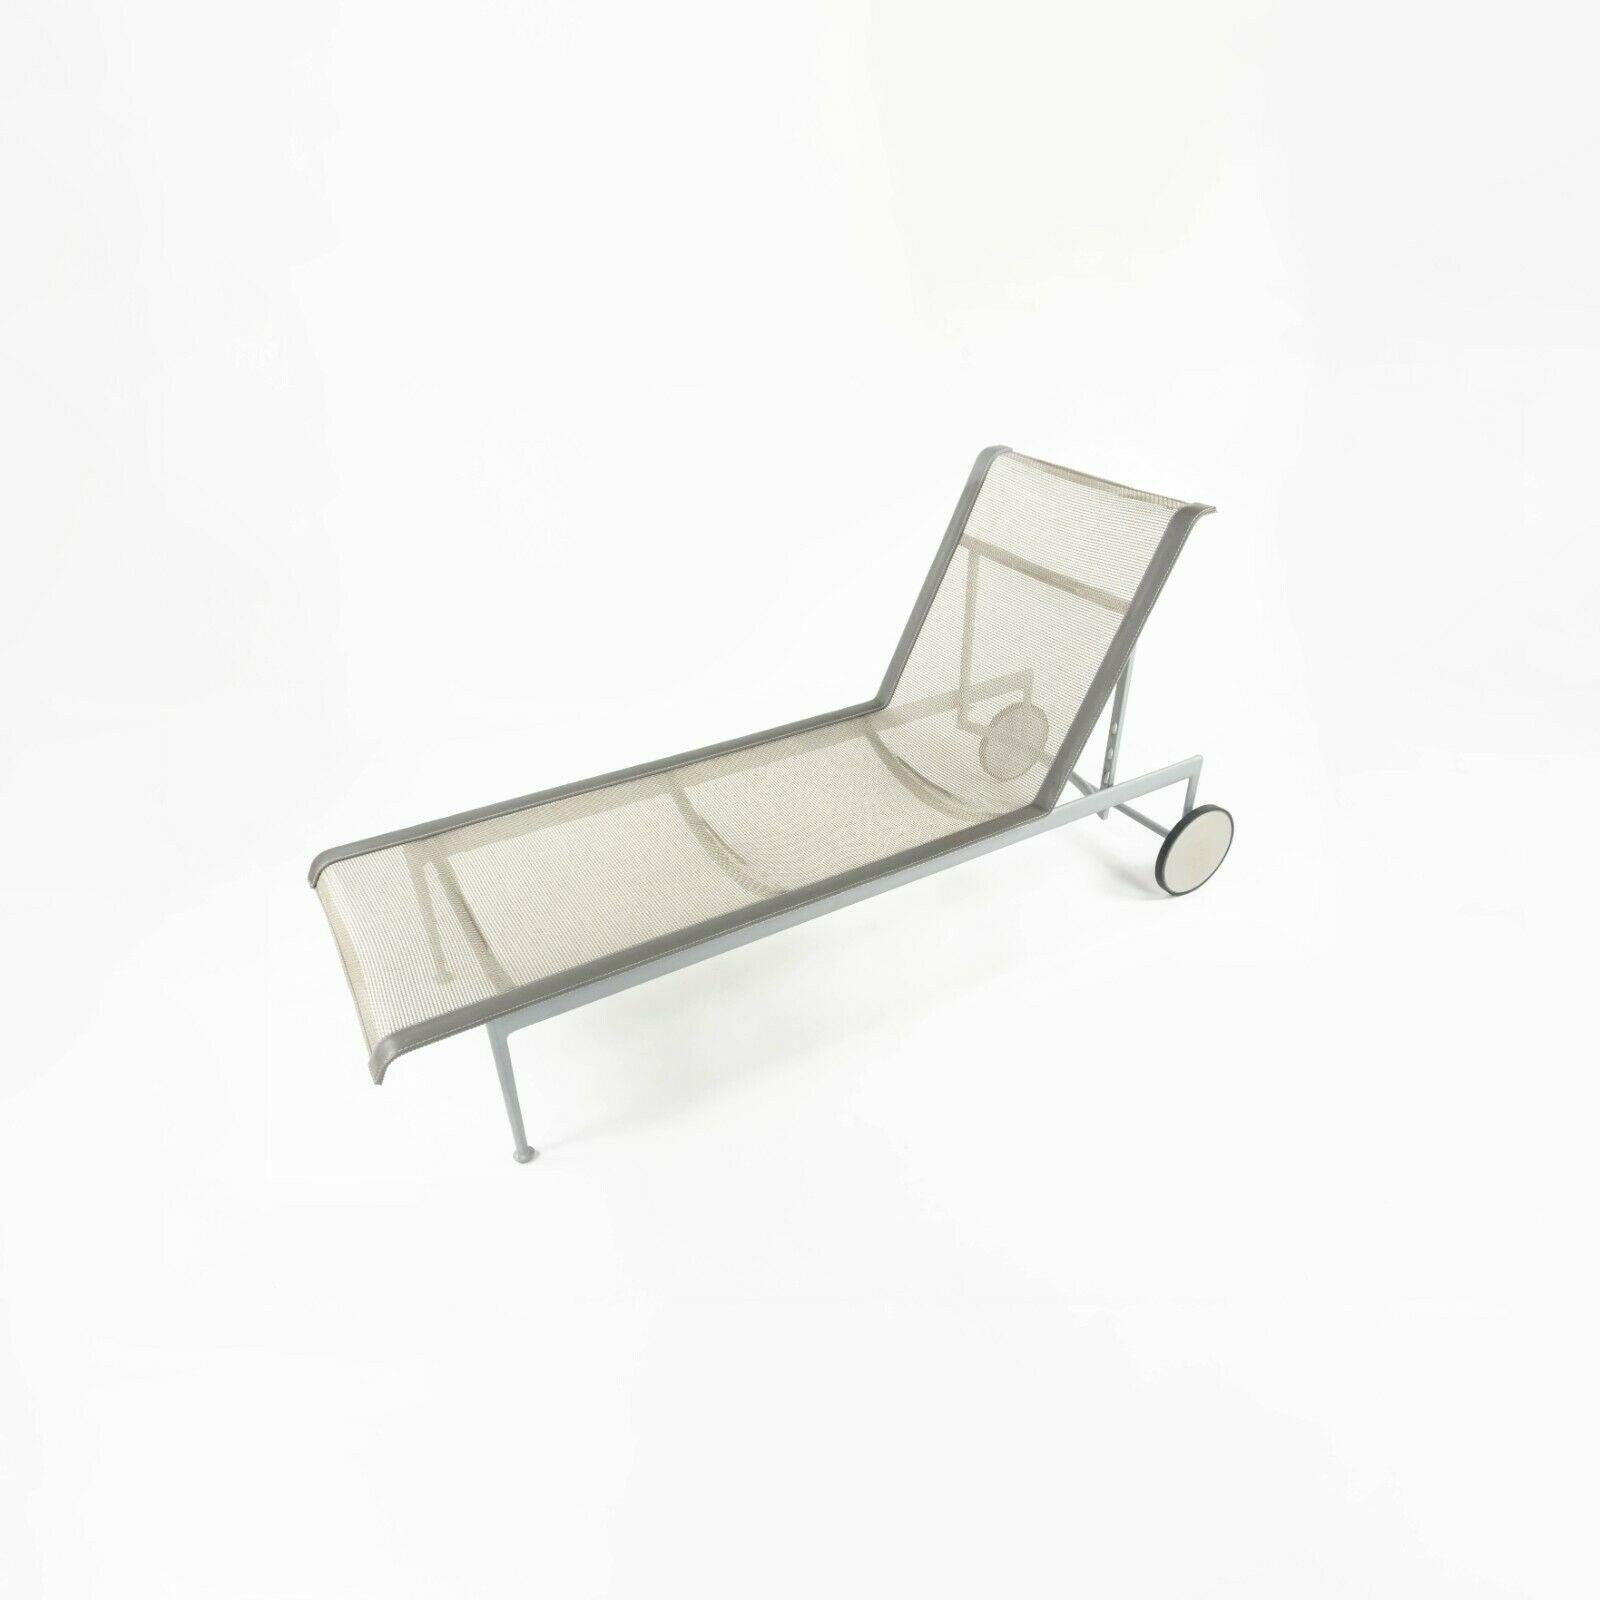 2012 Richard Schultz 1966 Series Adjustable Chaise Lounge Chair in Silver For Sale 2